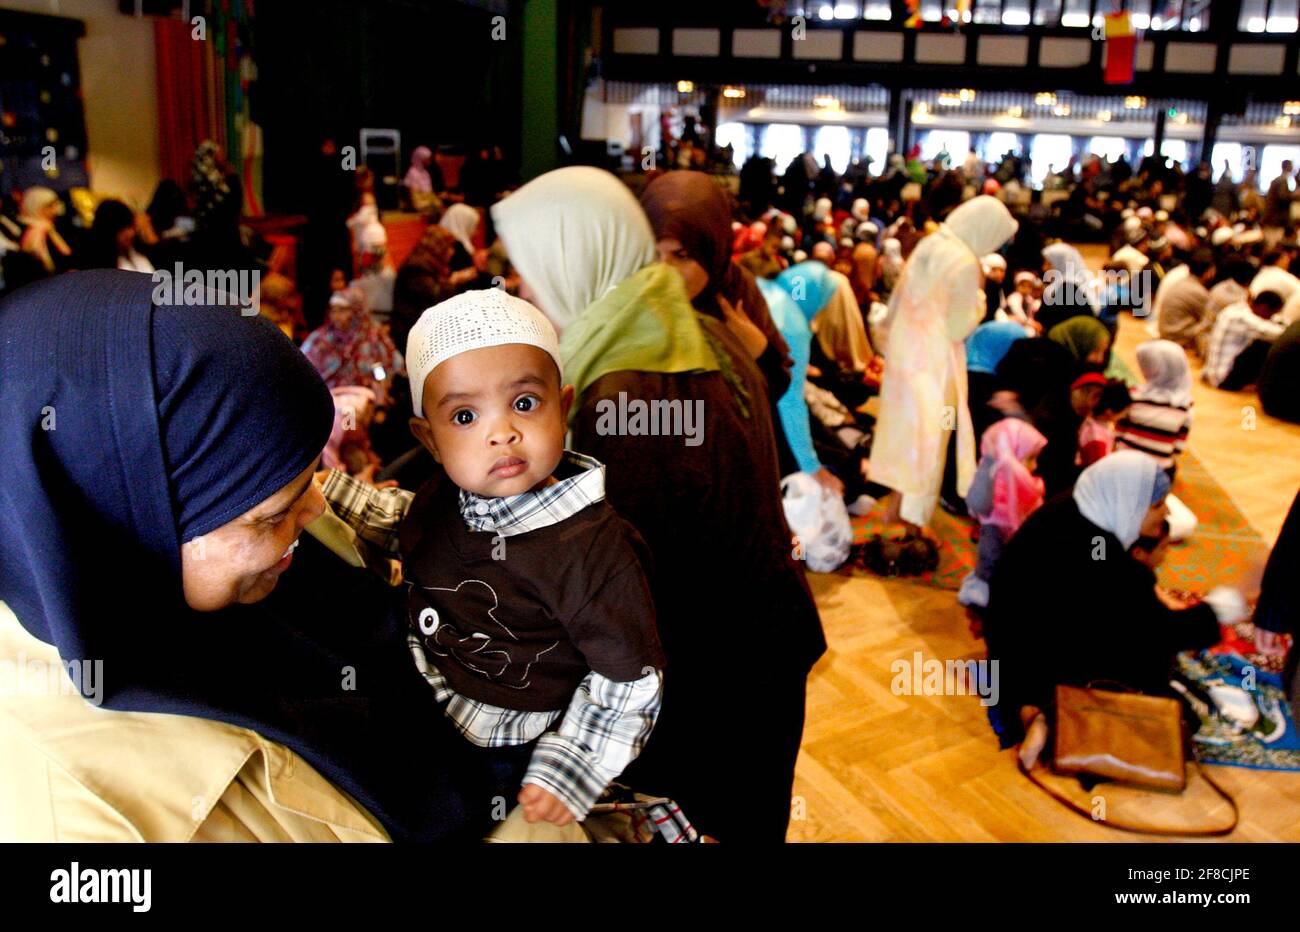 The celebration of Eid al-Fitr, which is the holiday that ends Ramadan, the Muslim fasting month. Stock Photo